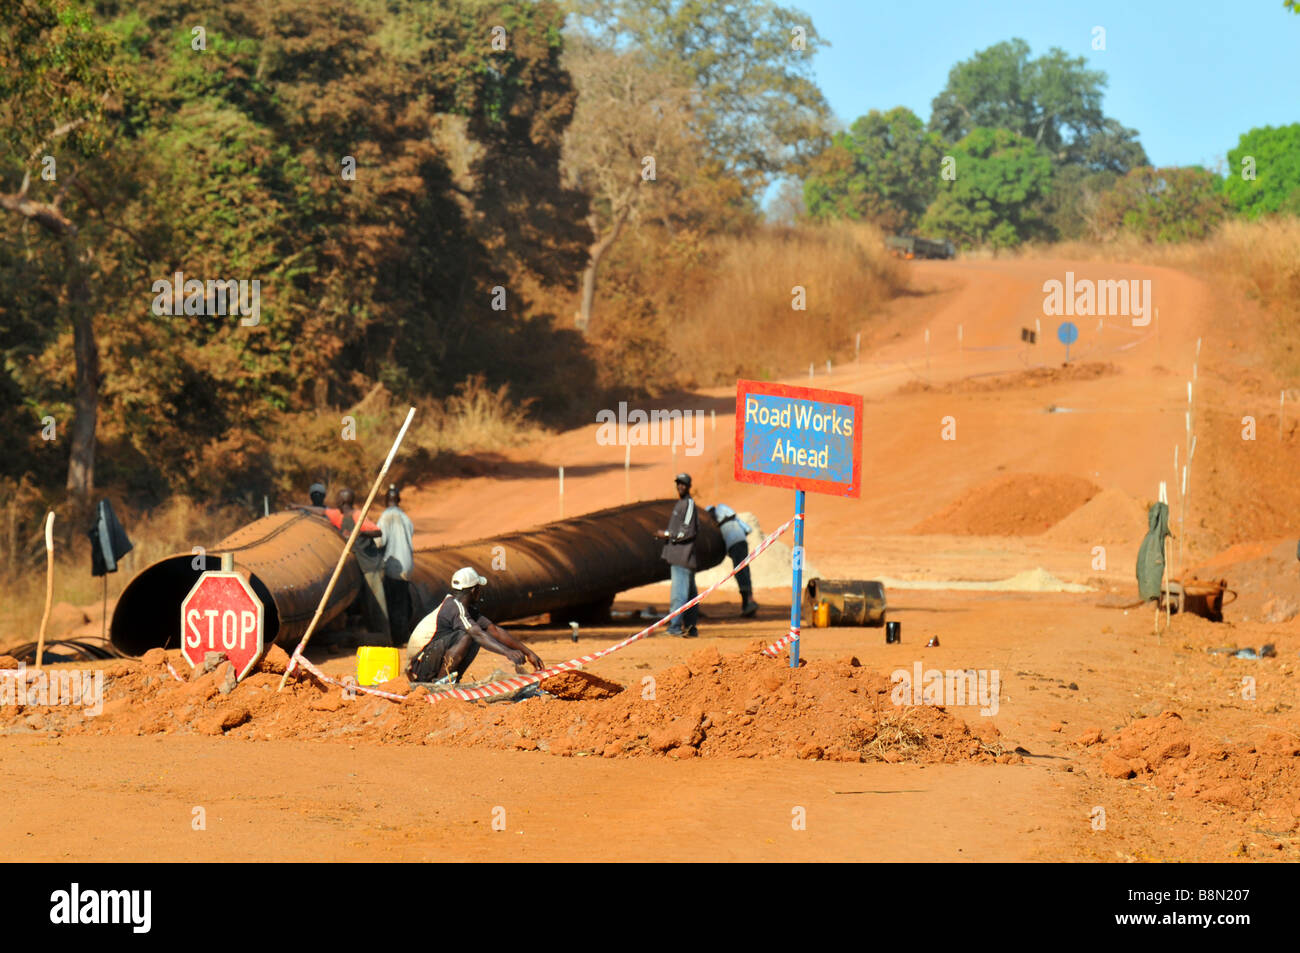 Roadworks in The Gambia, West Africa Stock Photo